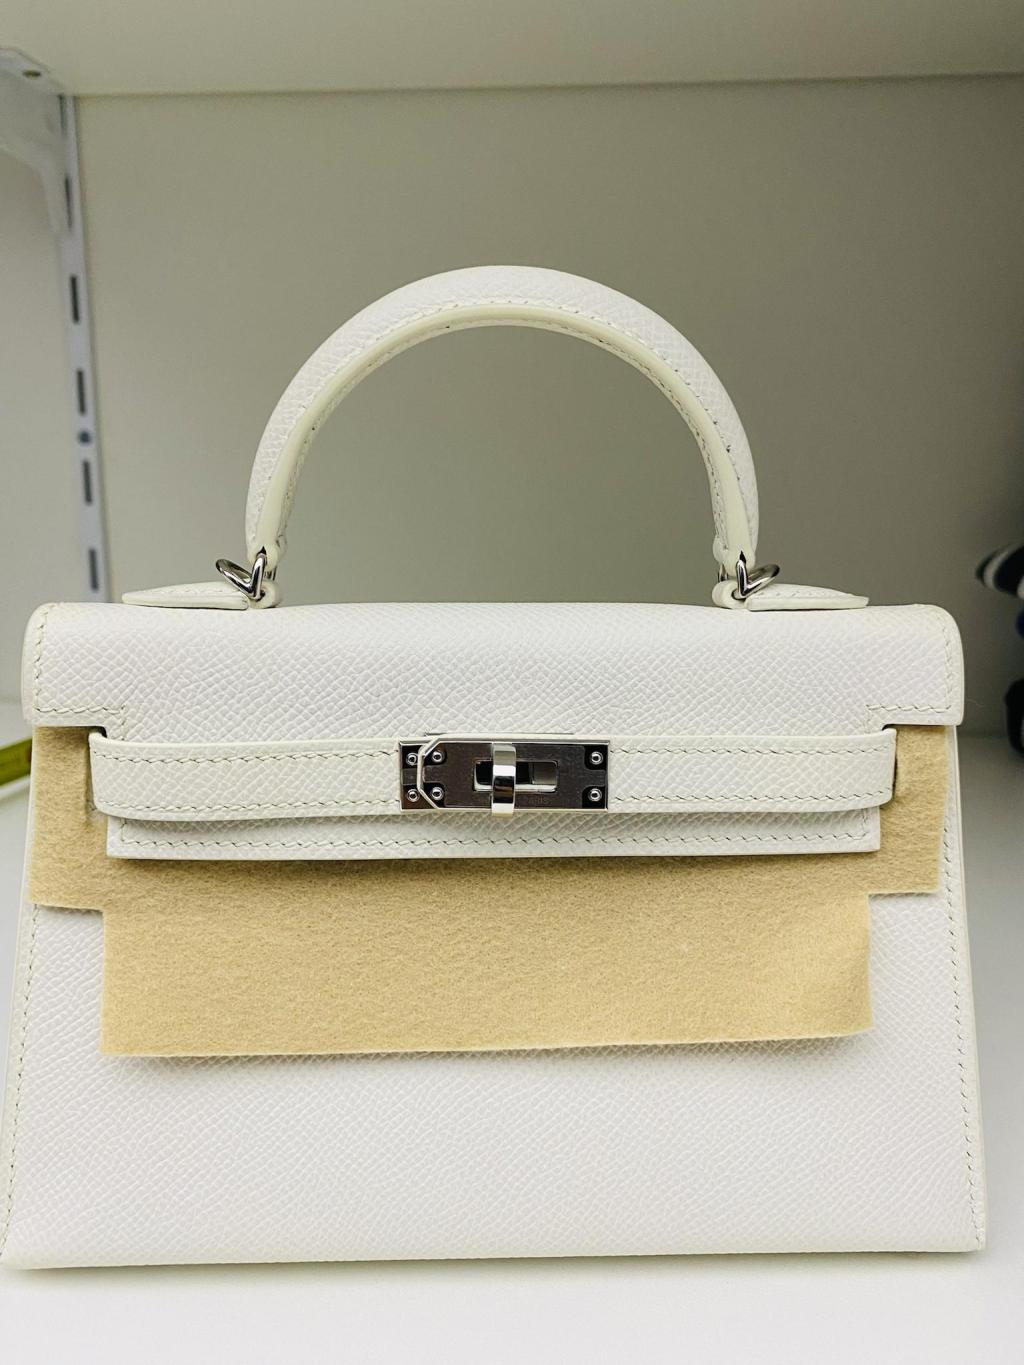 [Review] Hermes Mini Kelly 2  in White Epsom Leather with PHW from Steve